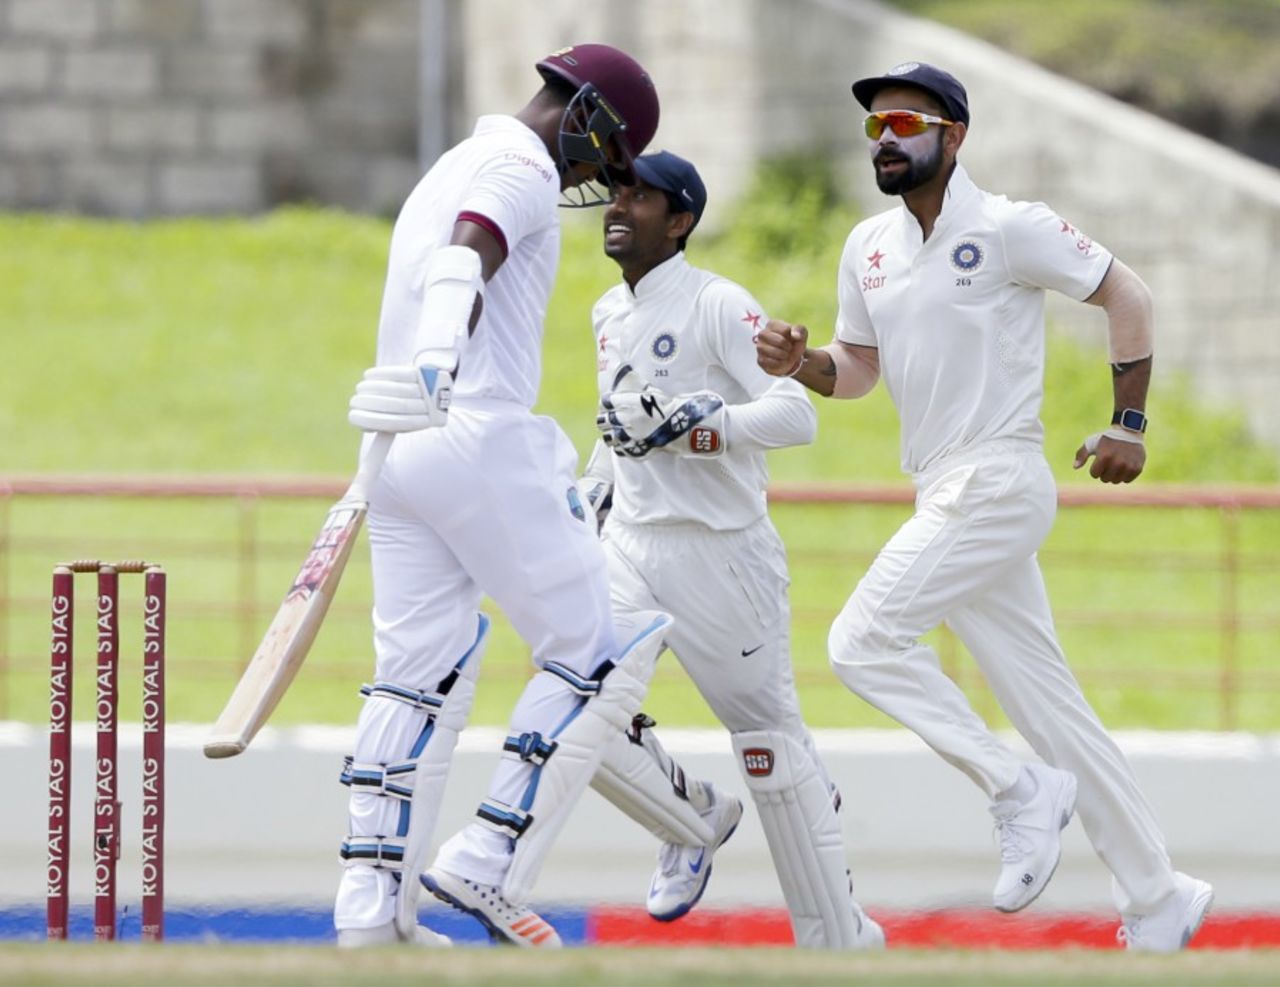 The India players celebrate the wicket of Leon Johnson, West Indies v India, 3rd Test, Gros Islet, 5th day, August 13, 2016